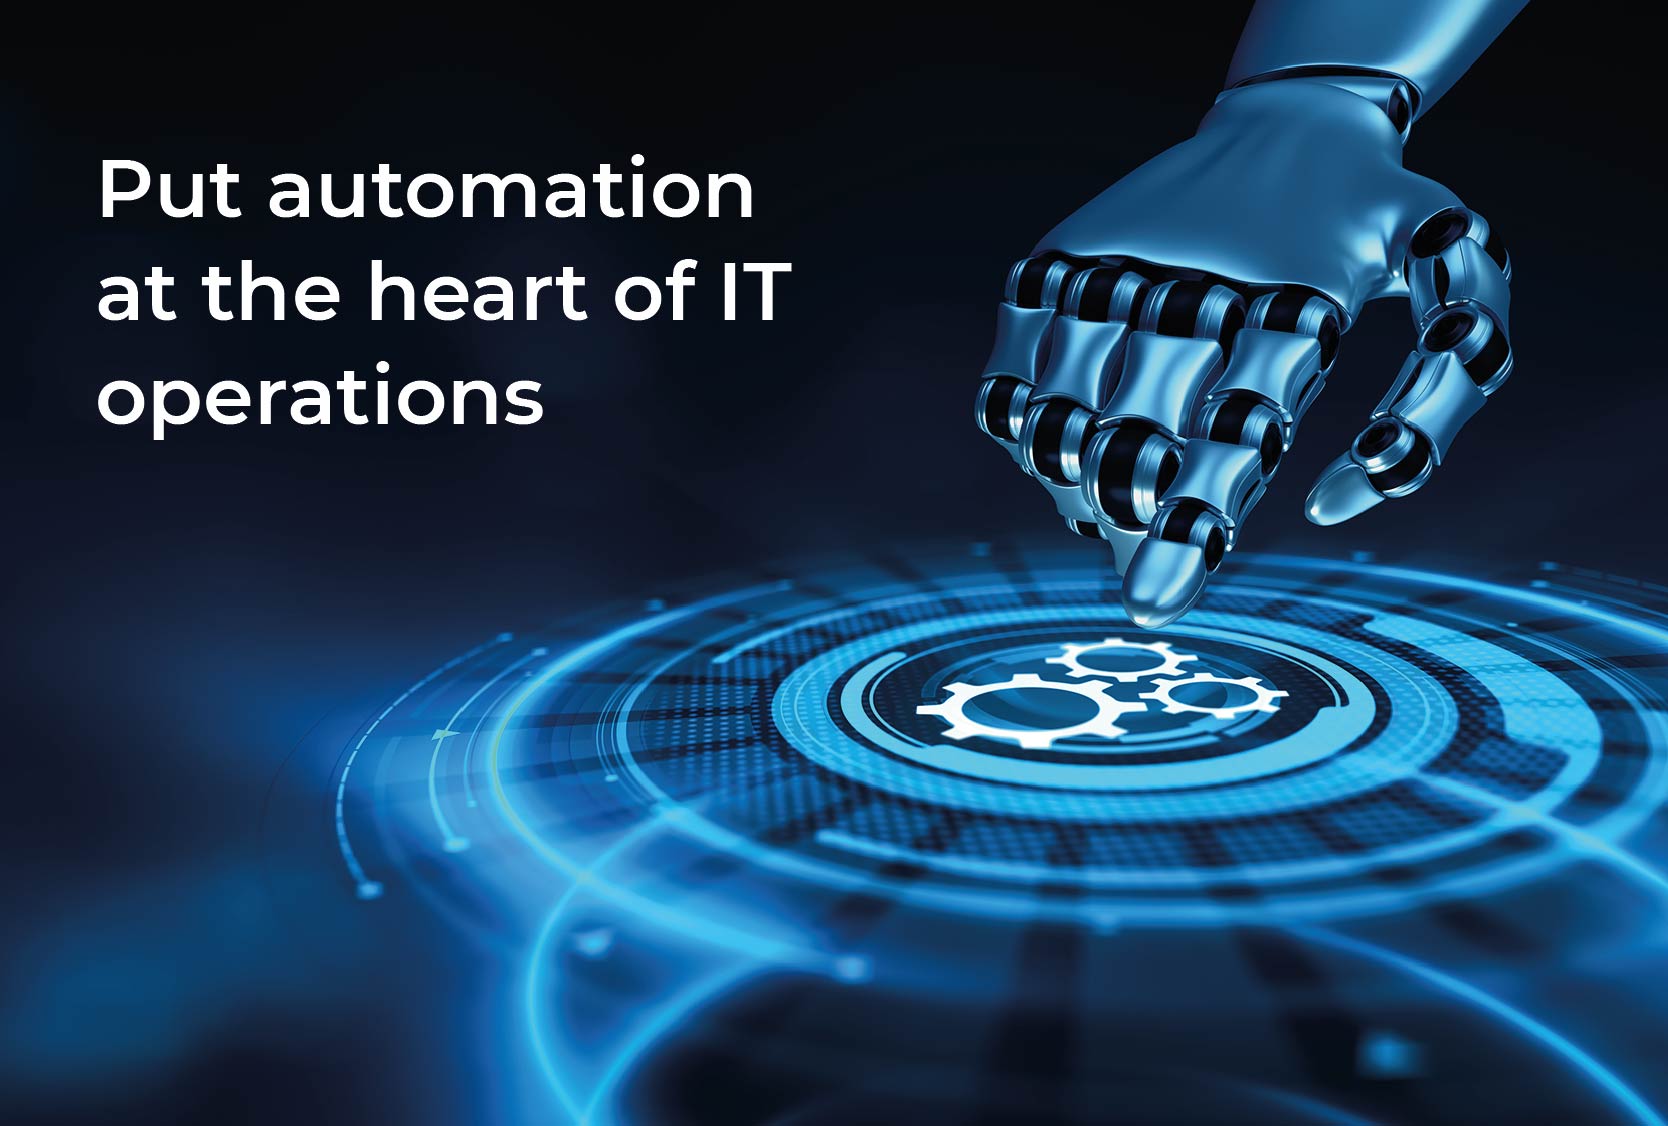 Put automation at the heart of IT operations